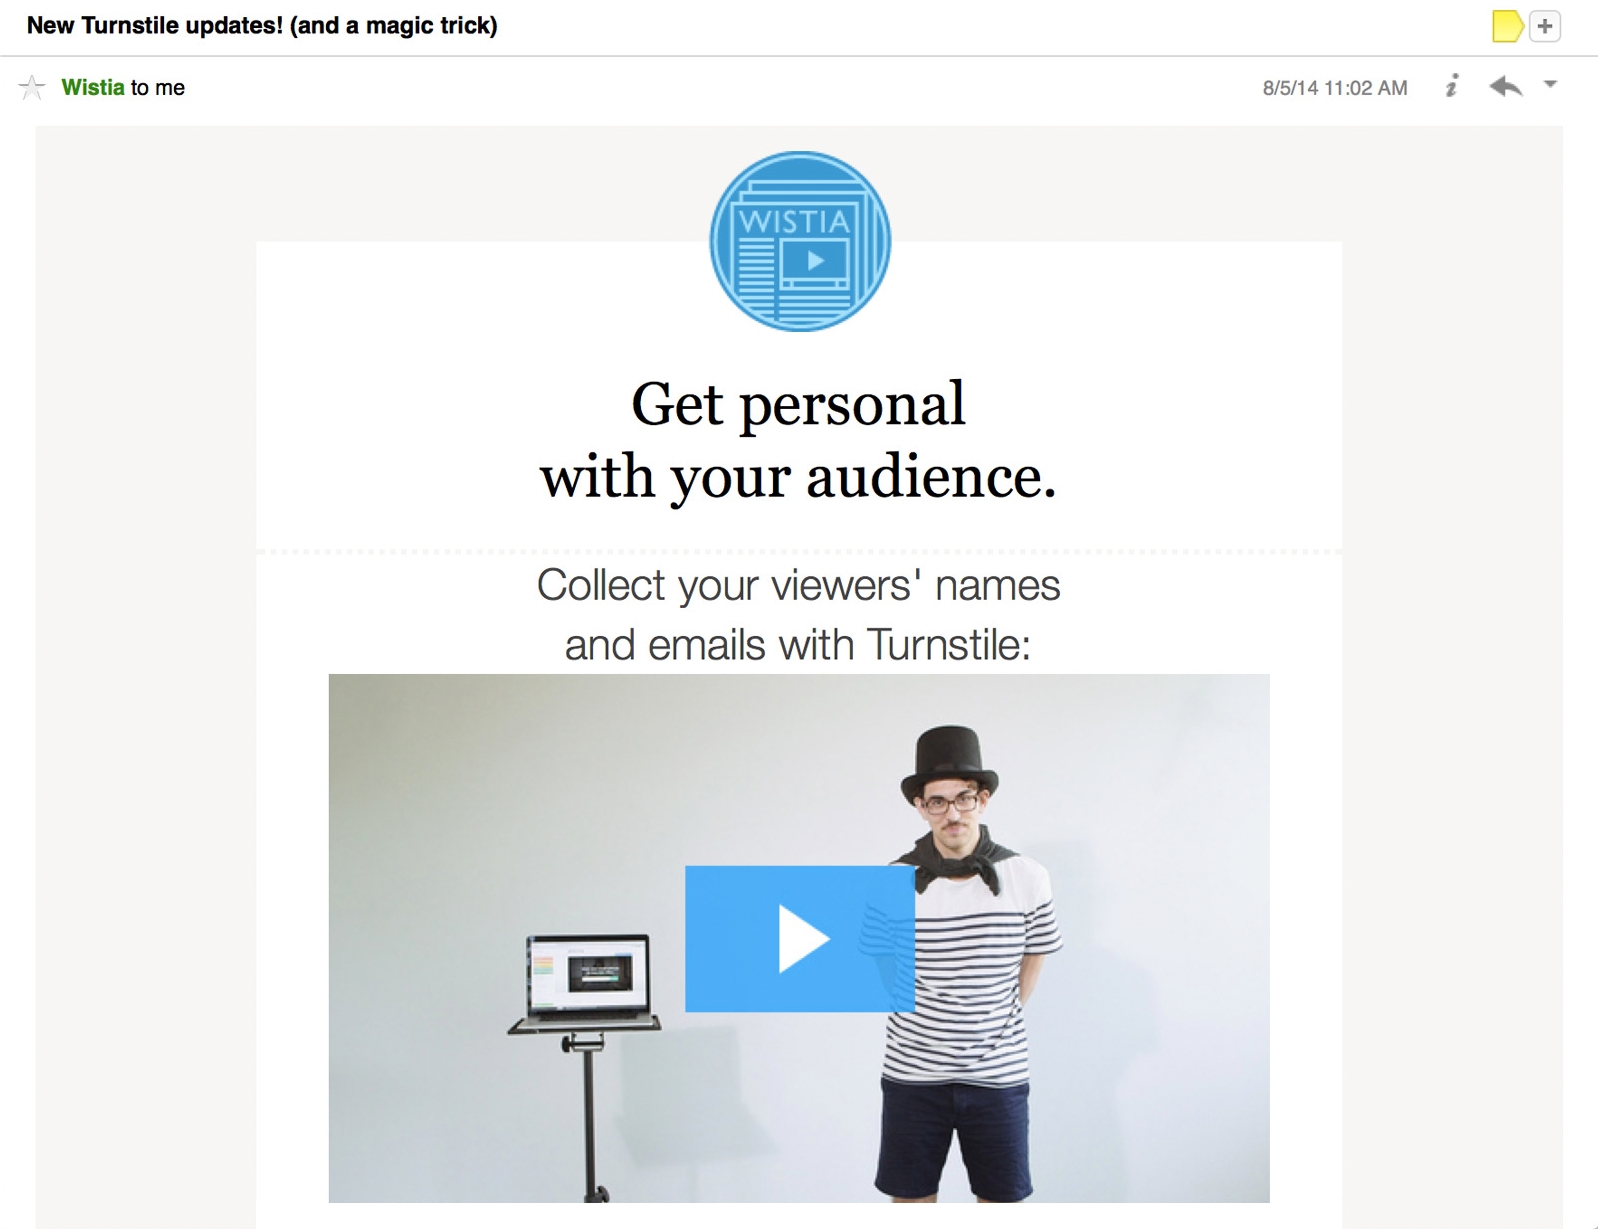 Types of Video Content: video in email